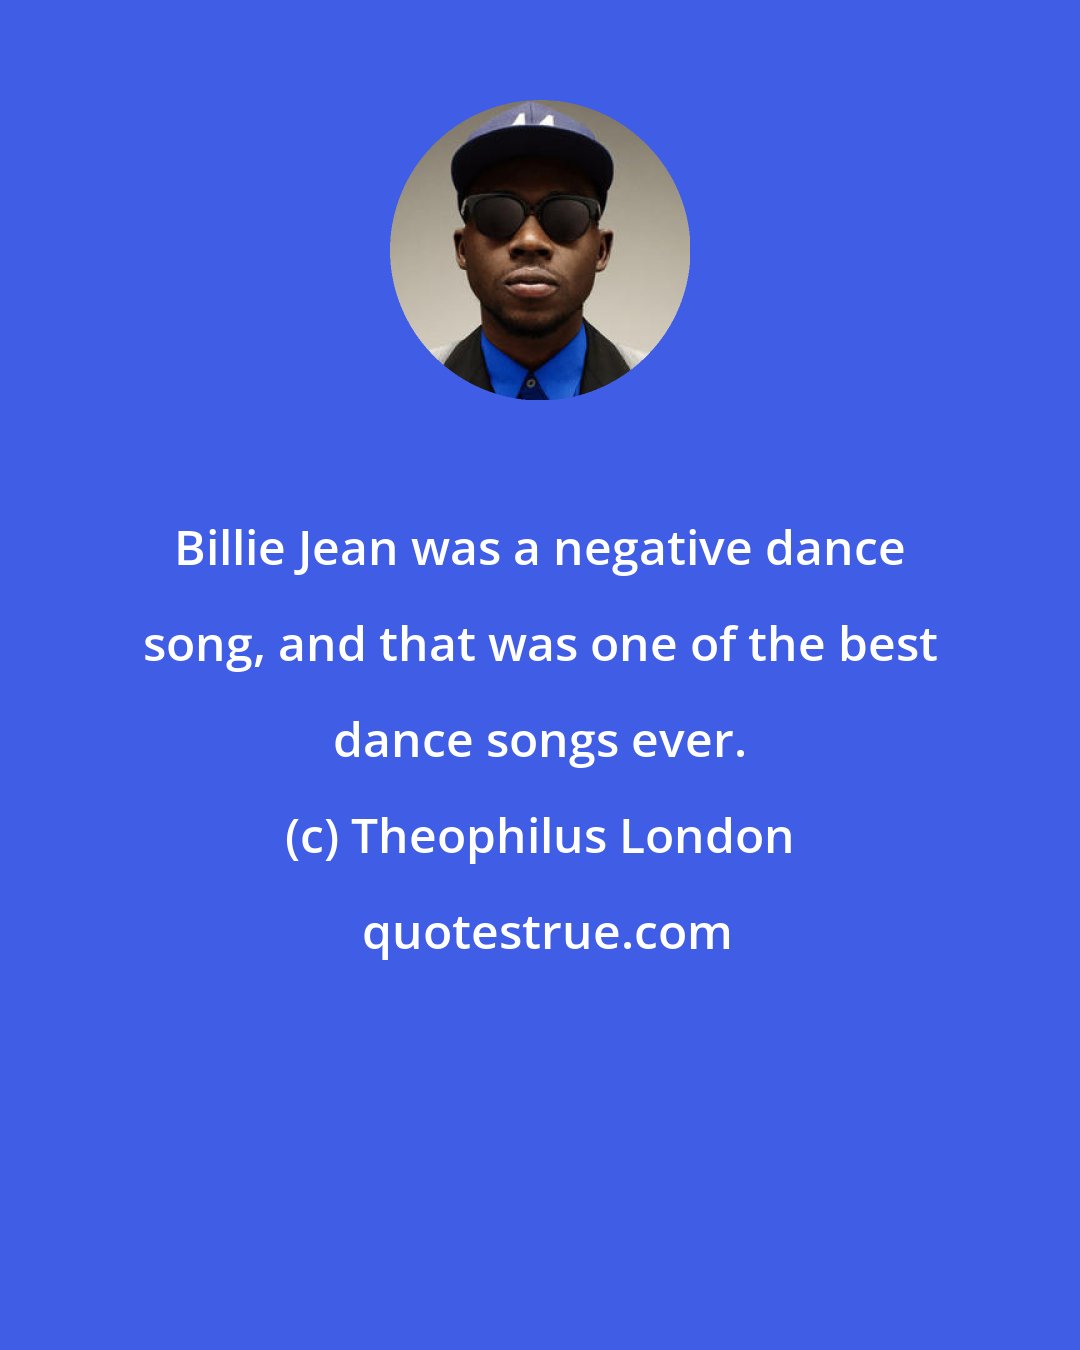 Theophilus London: Billie Jean was a negative dance song, and that was one of the best dance songs ever.